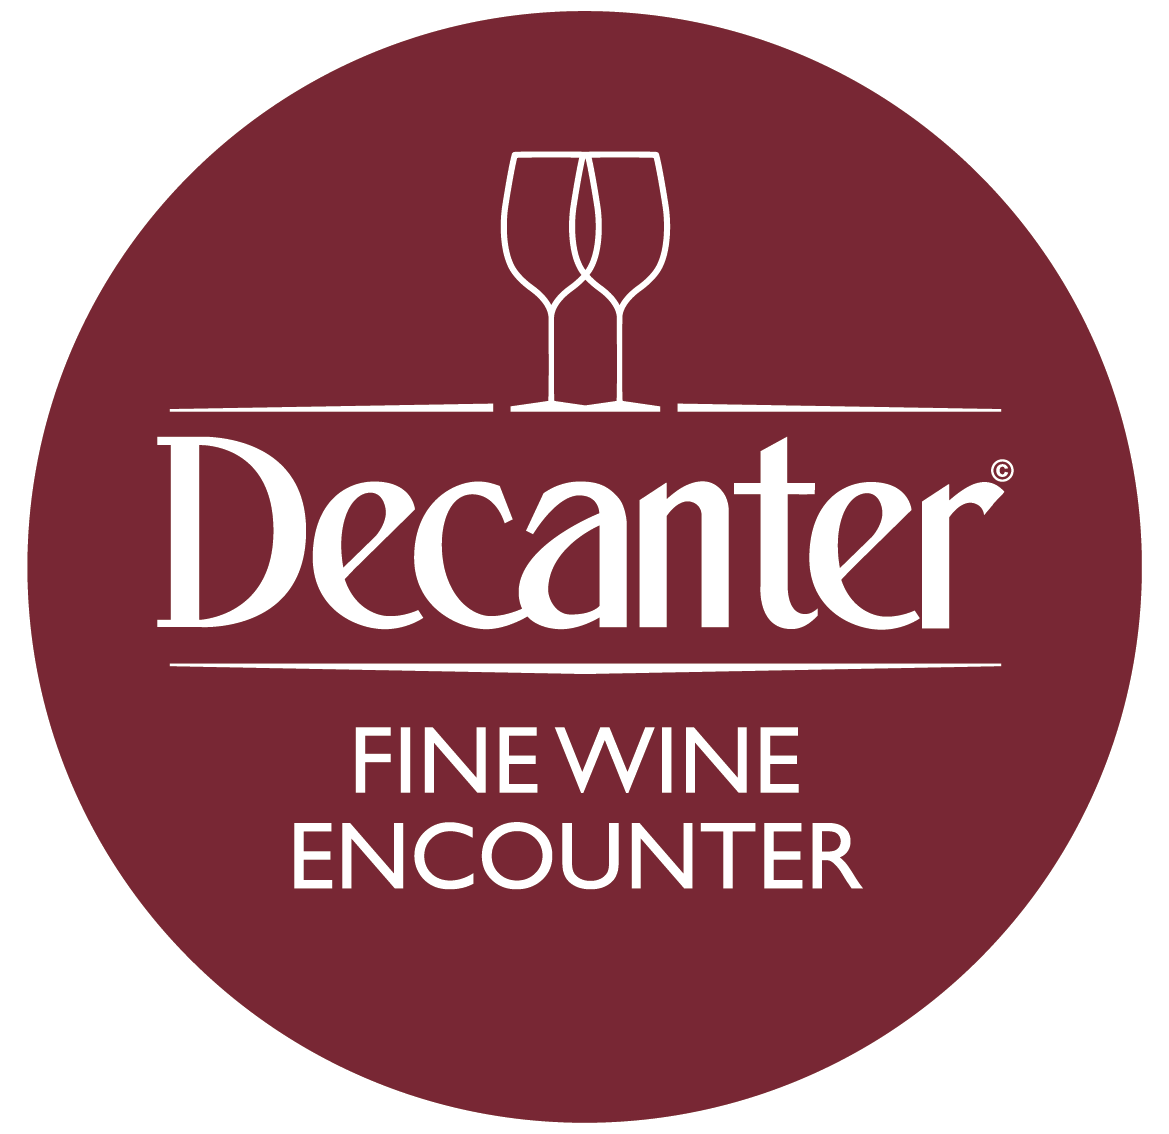 DWWA 2019 Winners Table at the Decanter Fine Wine Encounter